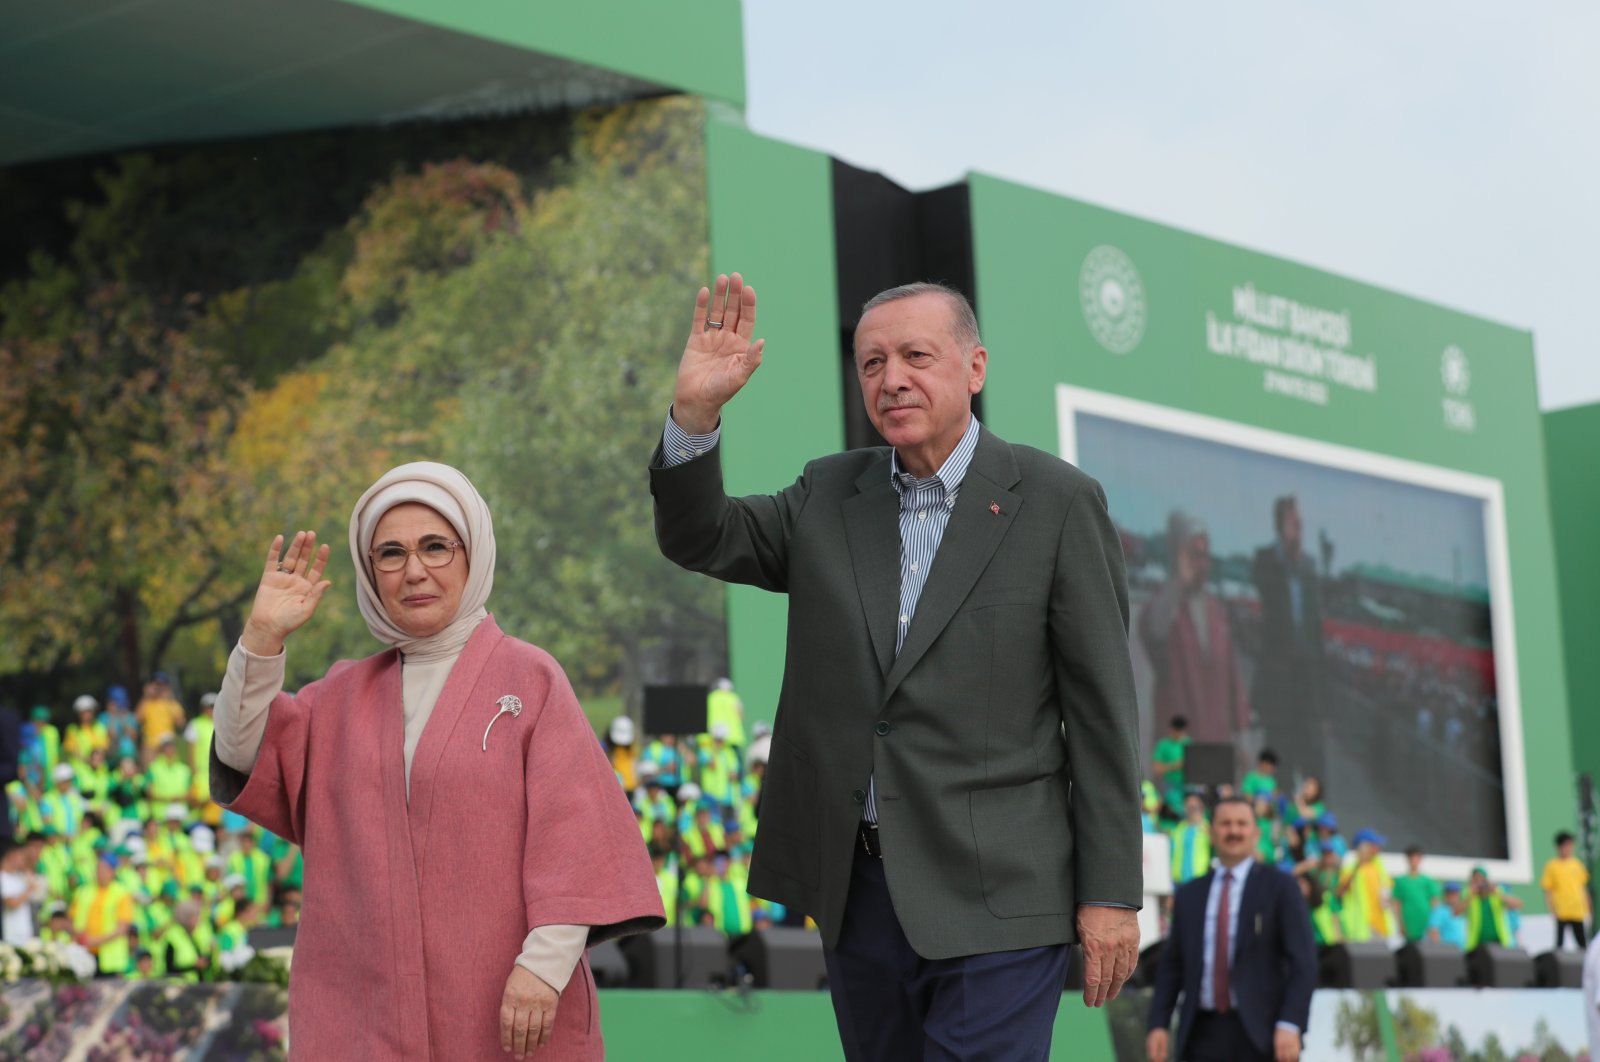 President Recep Tayyip Erdoğan and first lady Emine Erdoğan greet the crowd at Atatürk Airport, which will be transformed into a massive public park, May 29, 2022. (AA Photo)